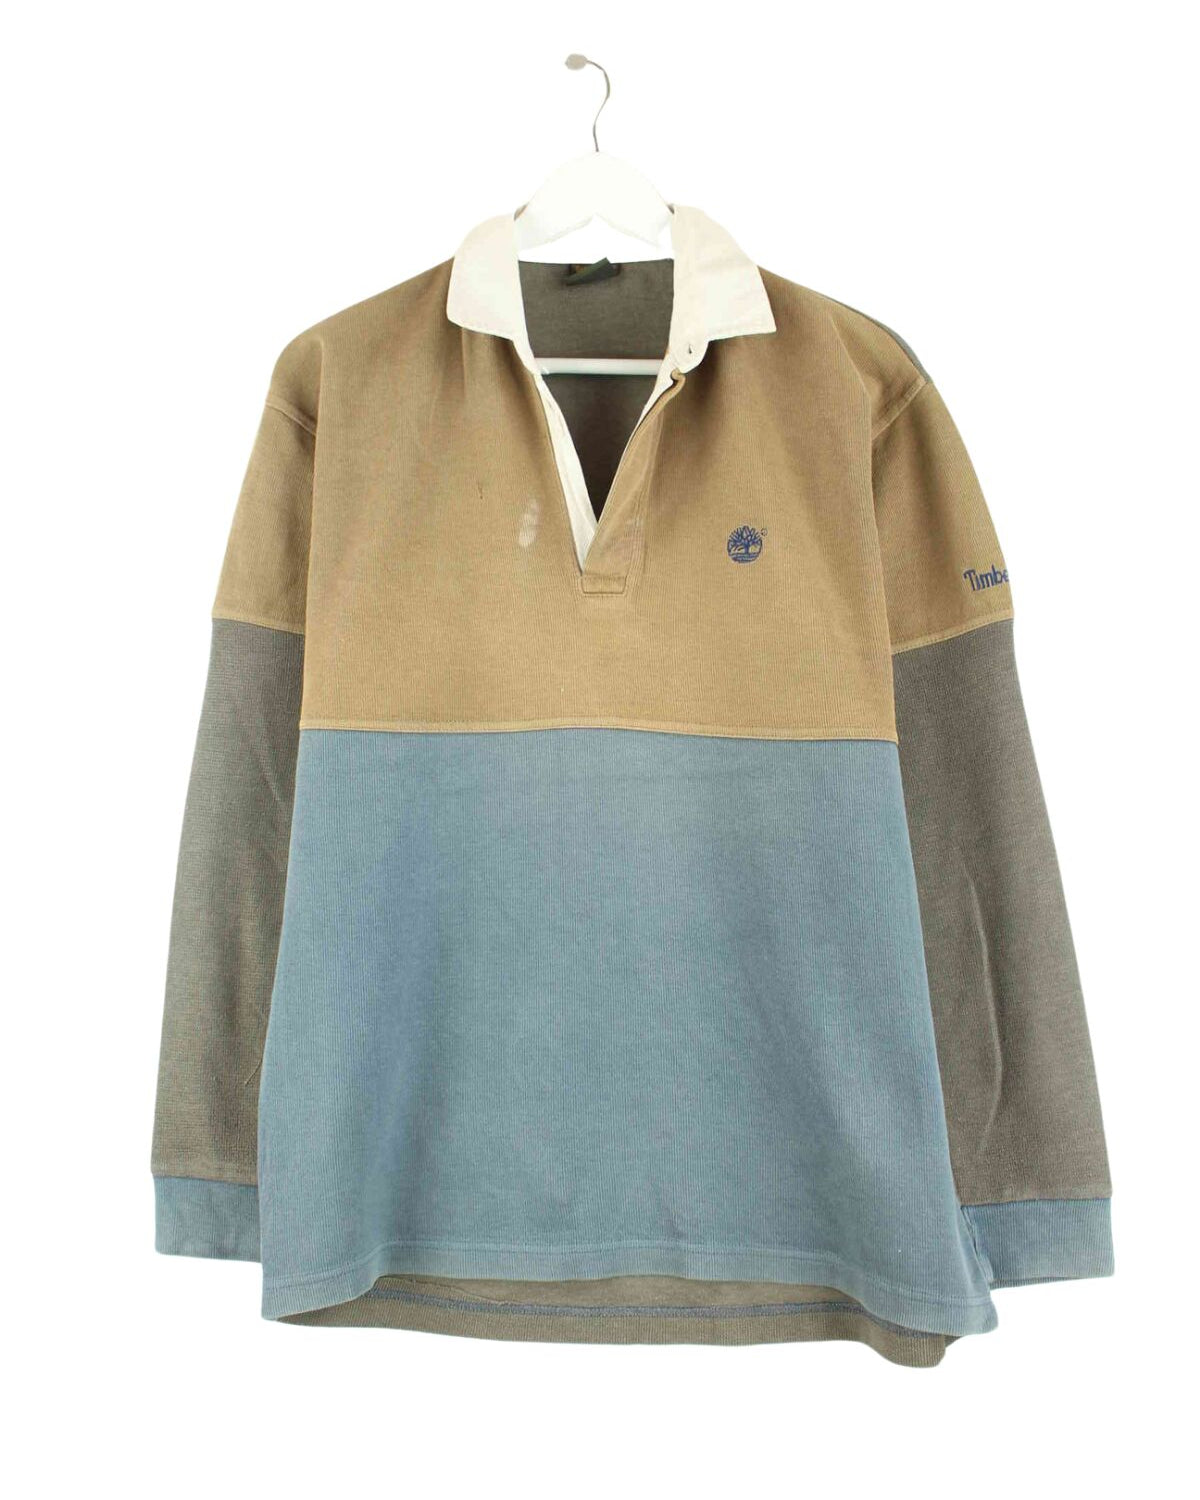 Timberland 90s Vintage Polo Sweater Braun L (front image)